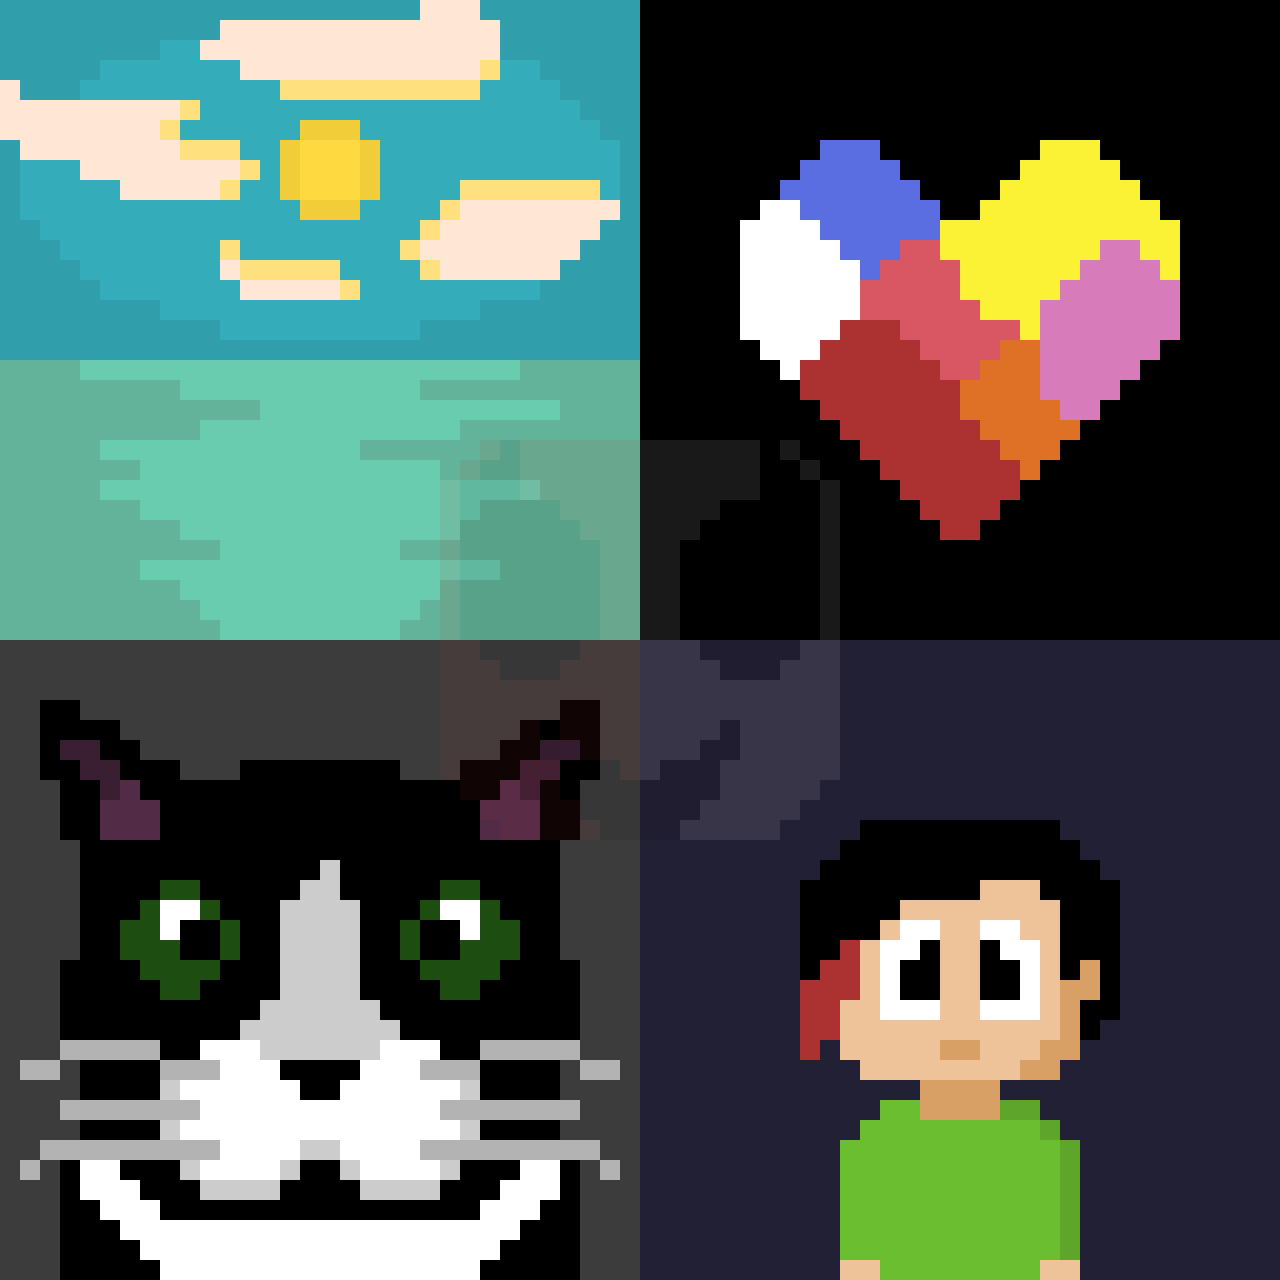 Pixel arts that I made some weeks ago